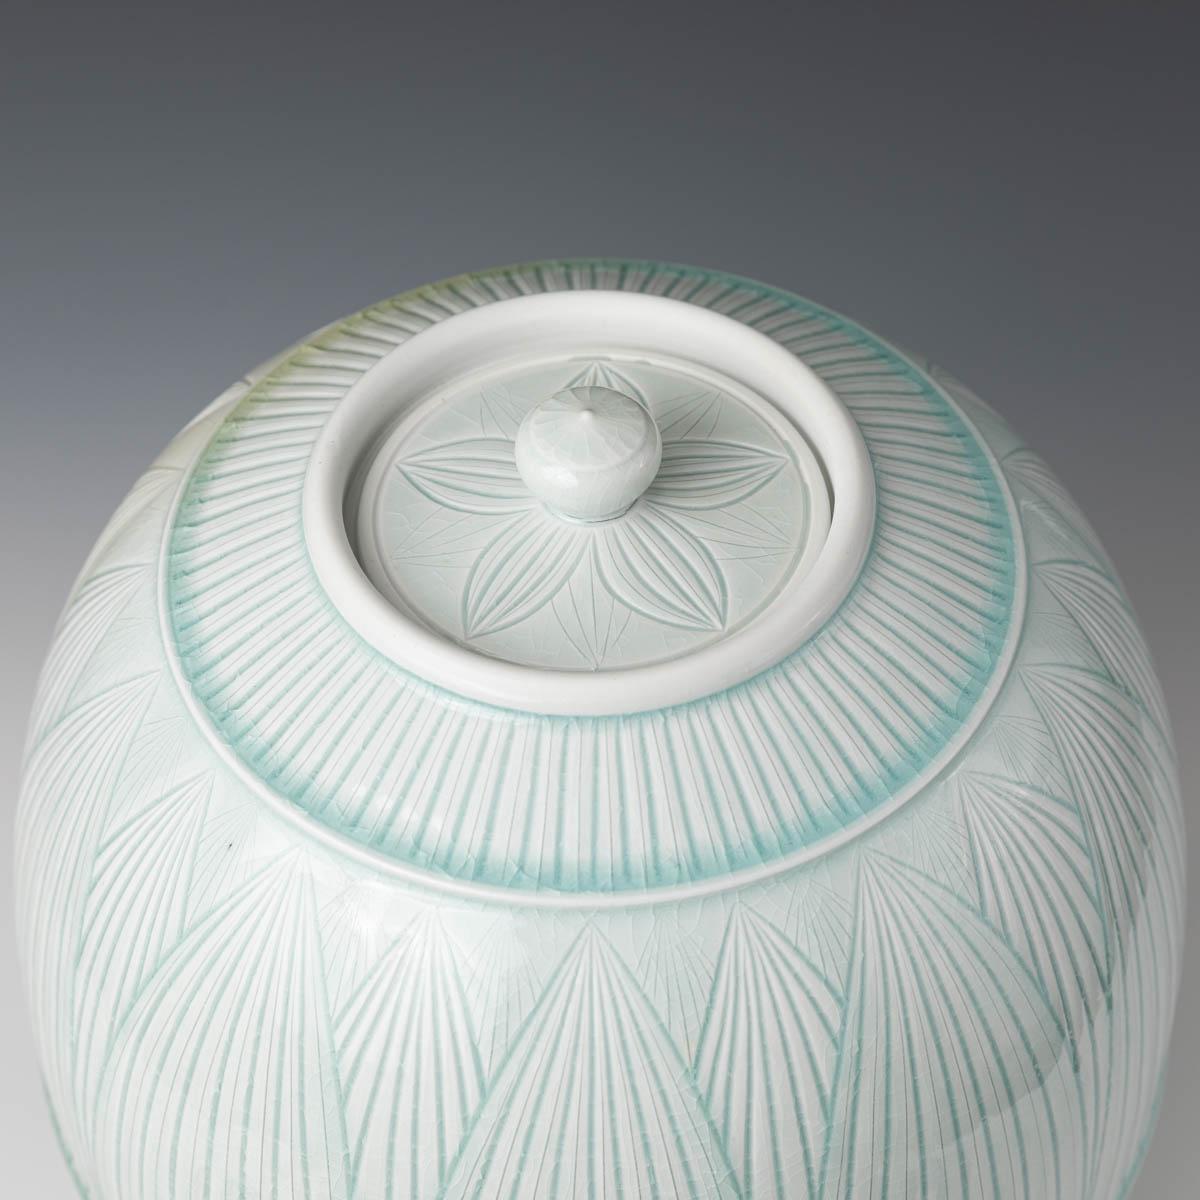 Large Covered Porcelain Jar with Lid- celedon glazed, hand carved, porcelain - Contemporary Sculpture by Adam Field